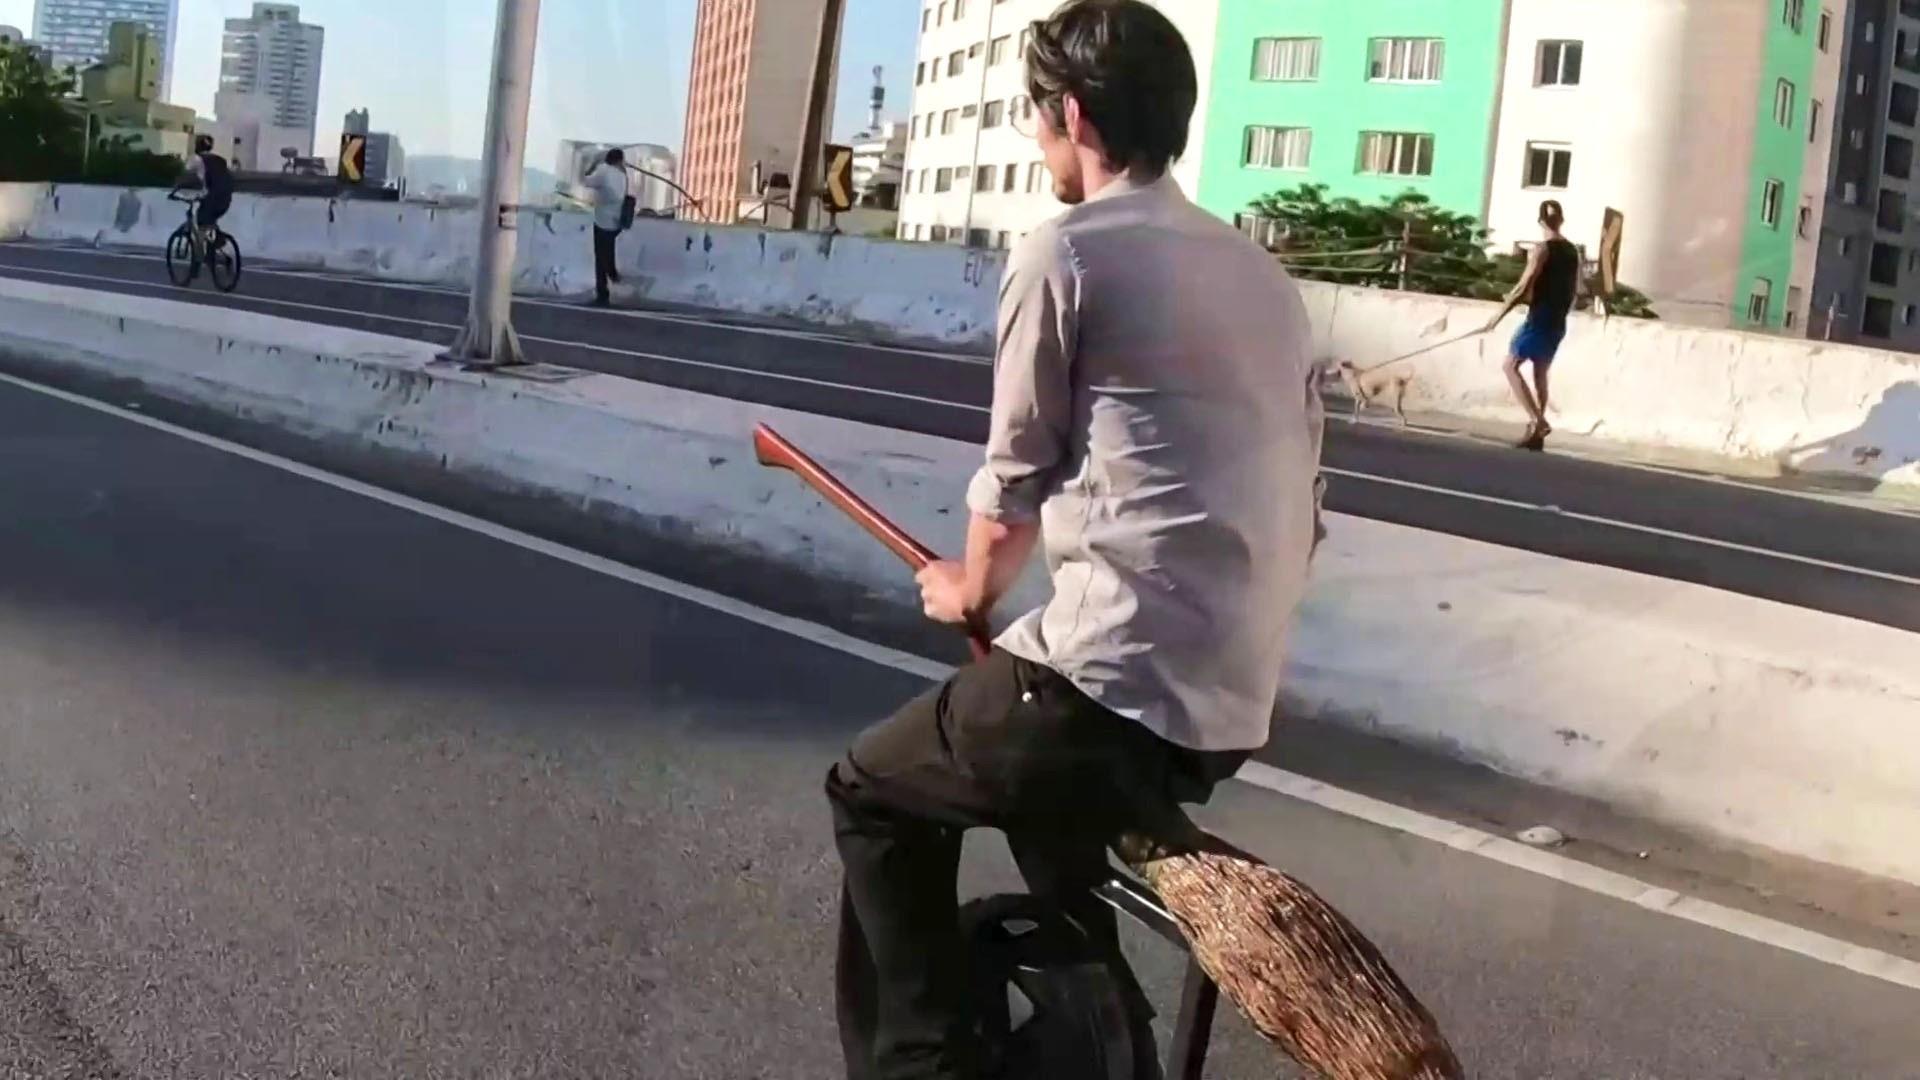 Potter cruise through Brazil on broomstick scooters